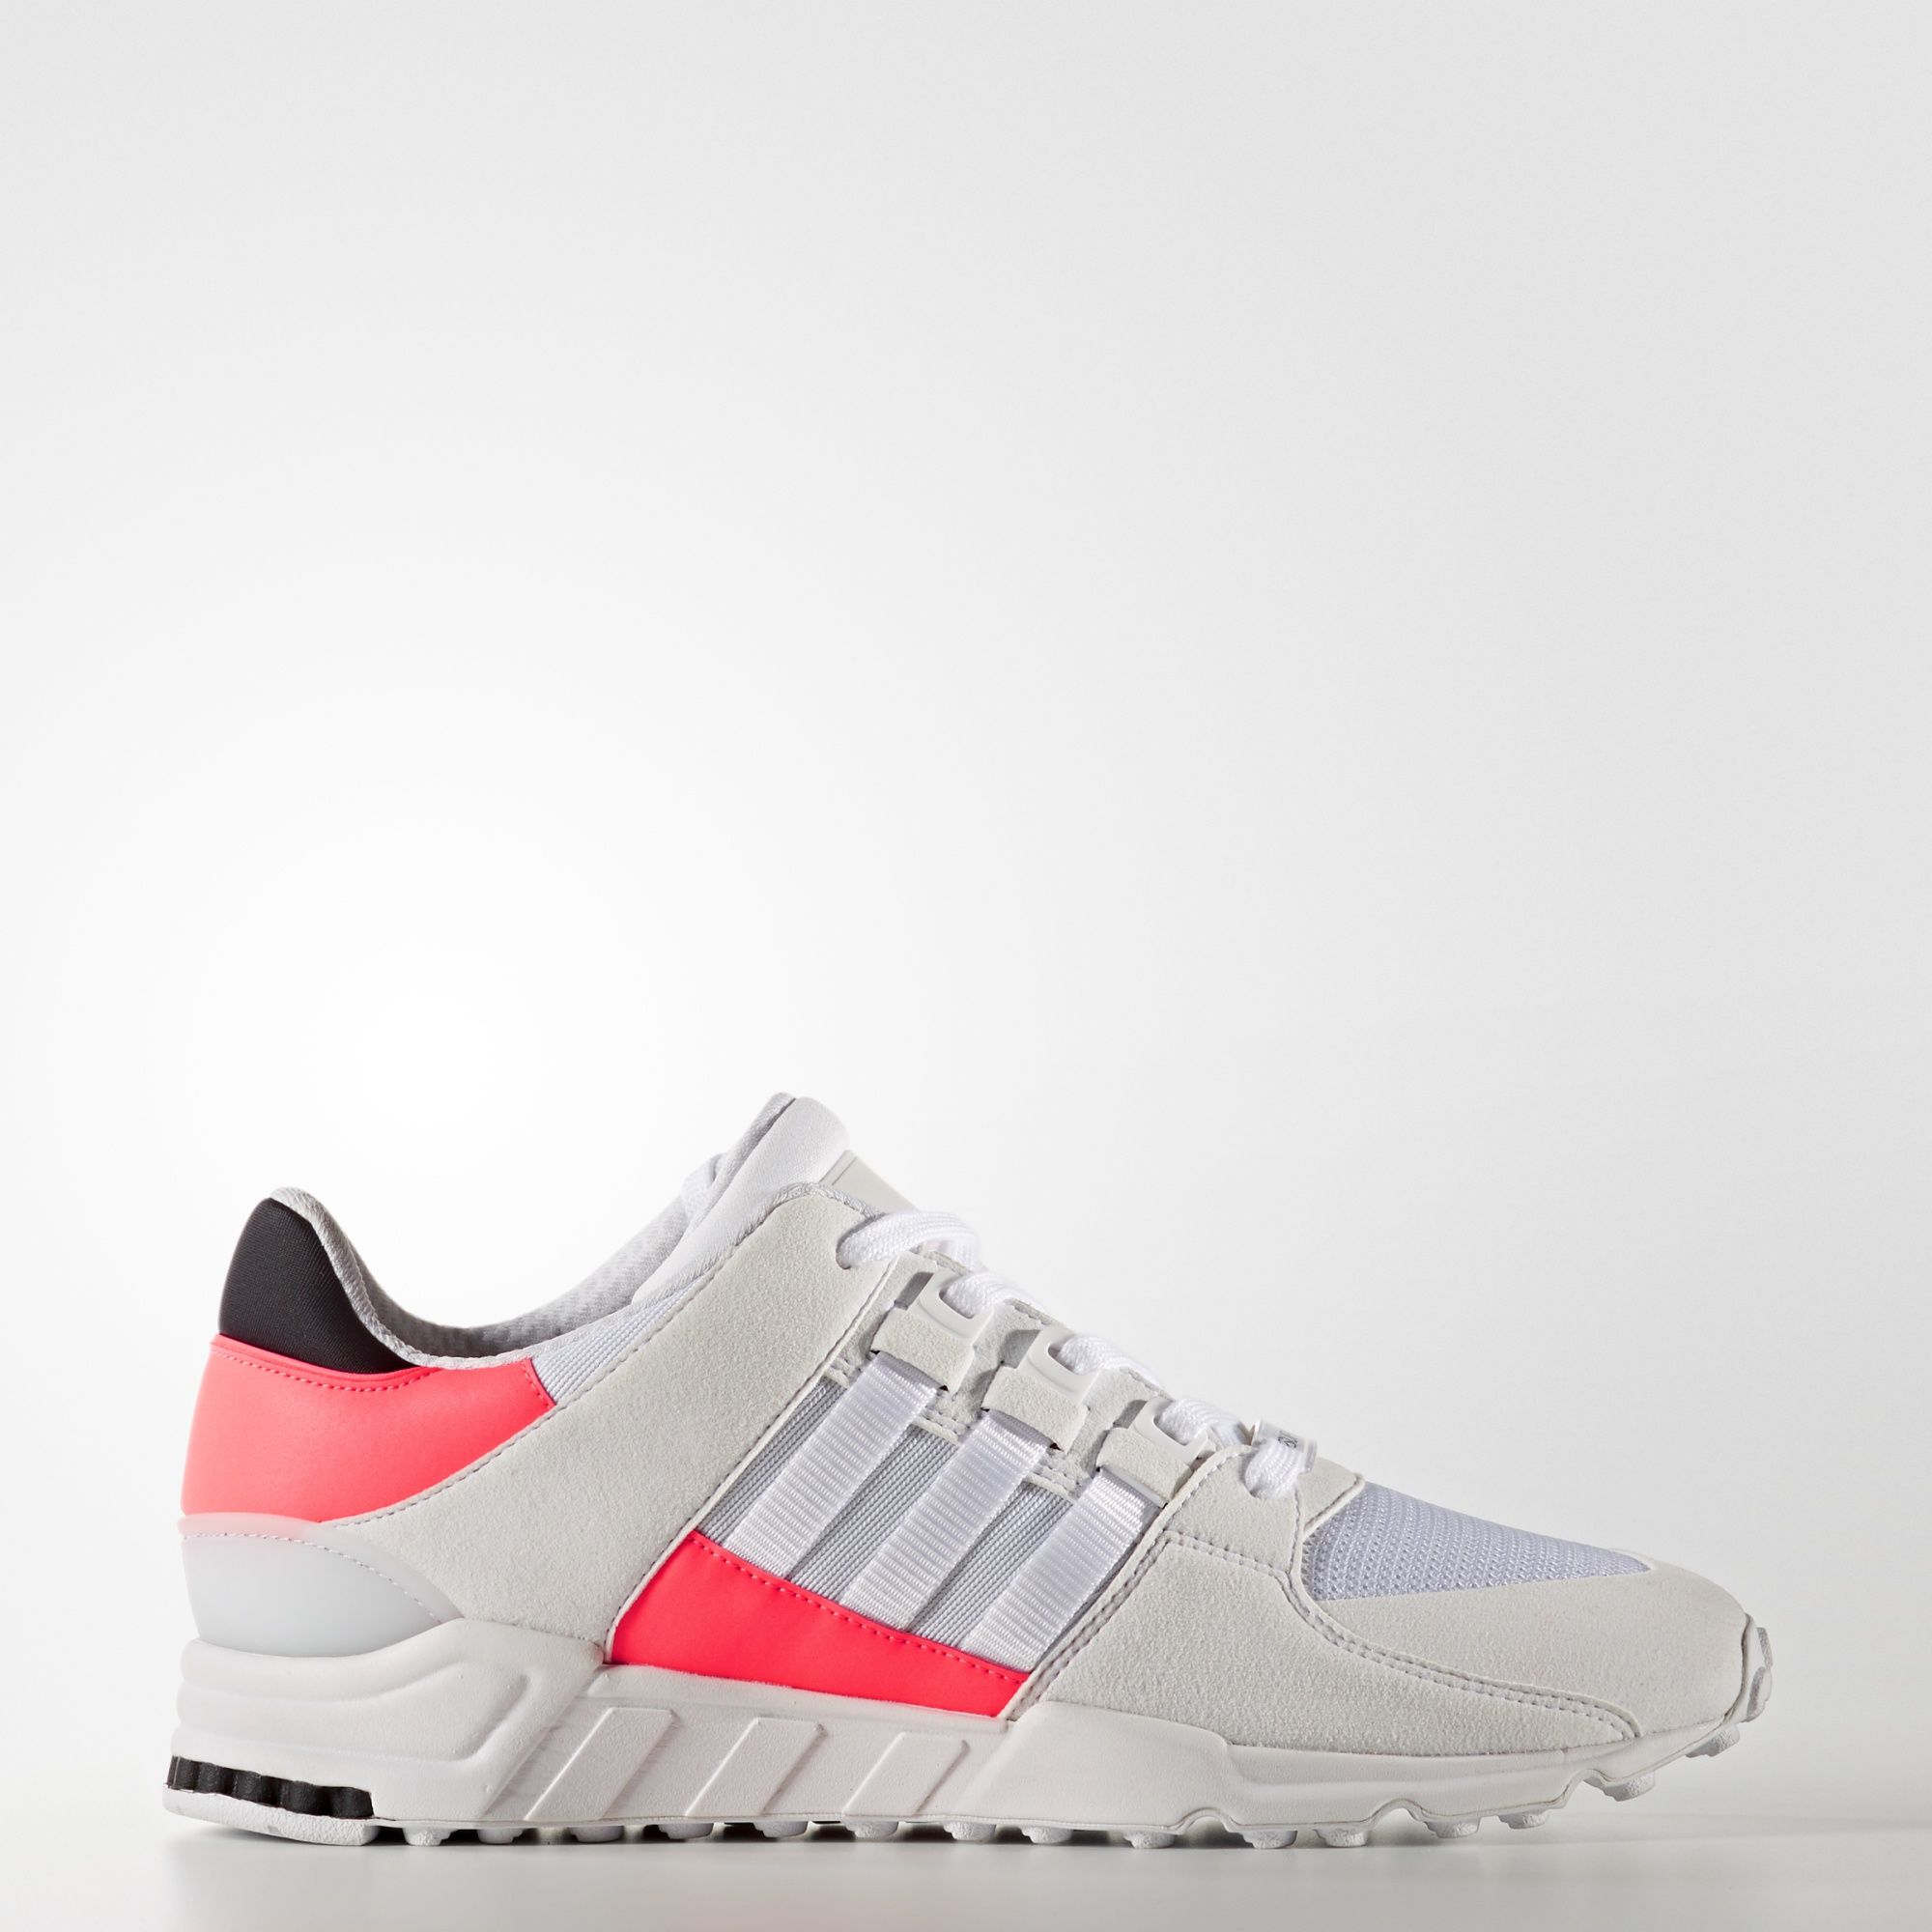 adidas-eqt-support-rf-white-turbo-red-ba7716-2